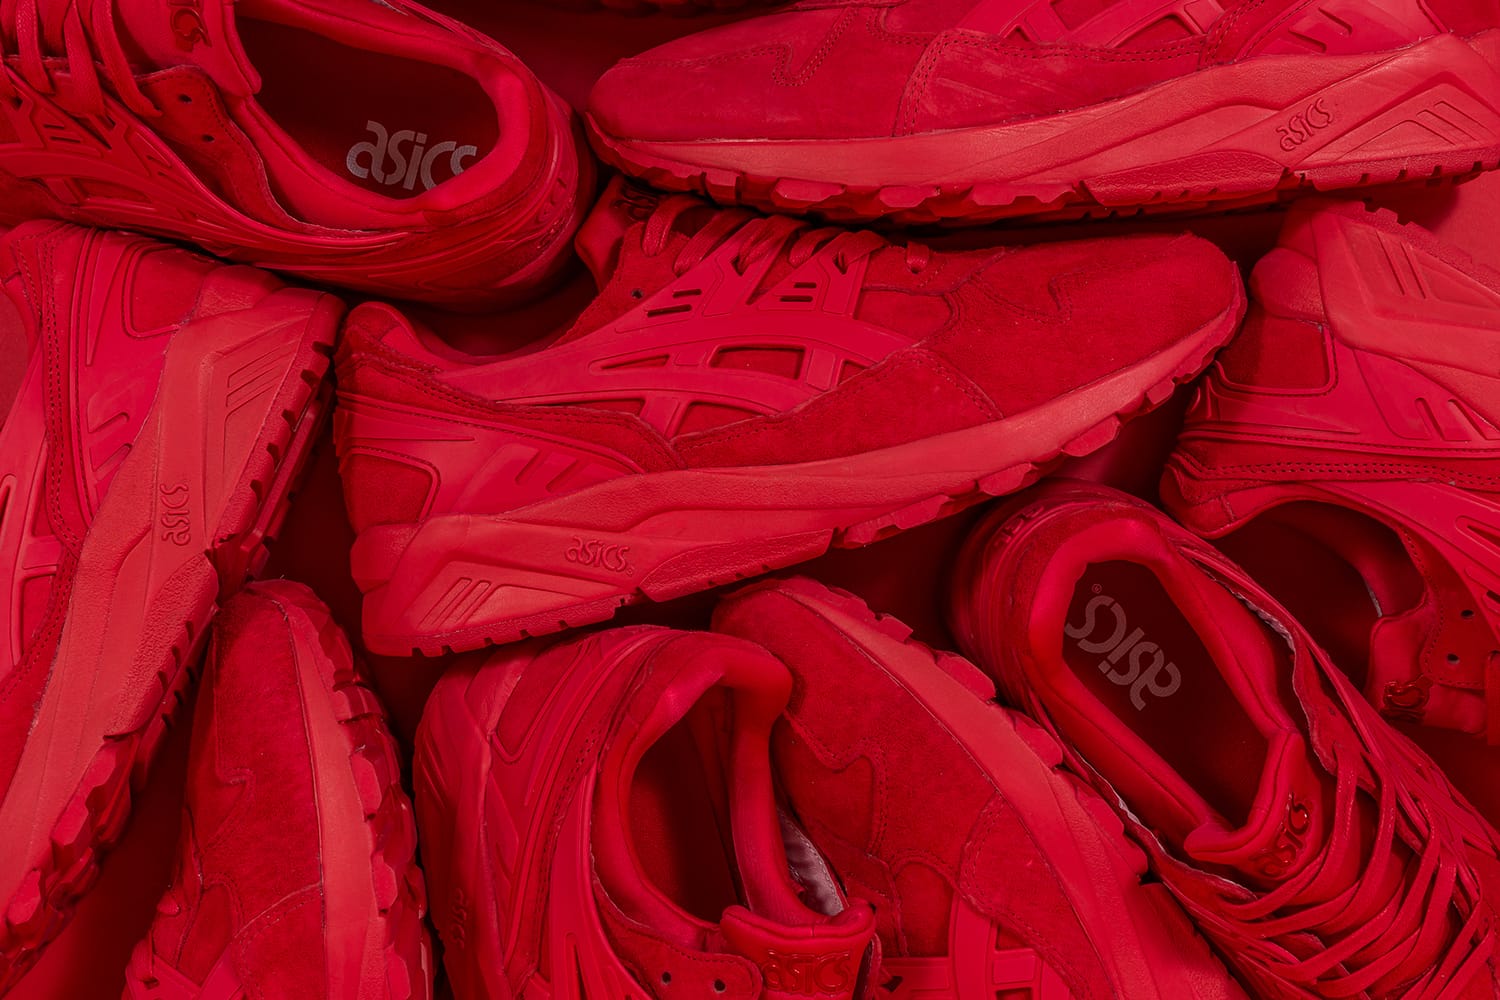 all red asics shoes